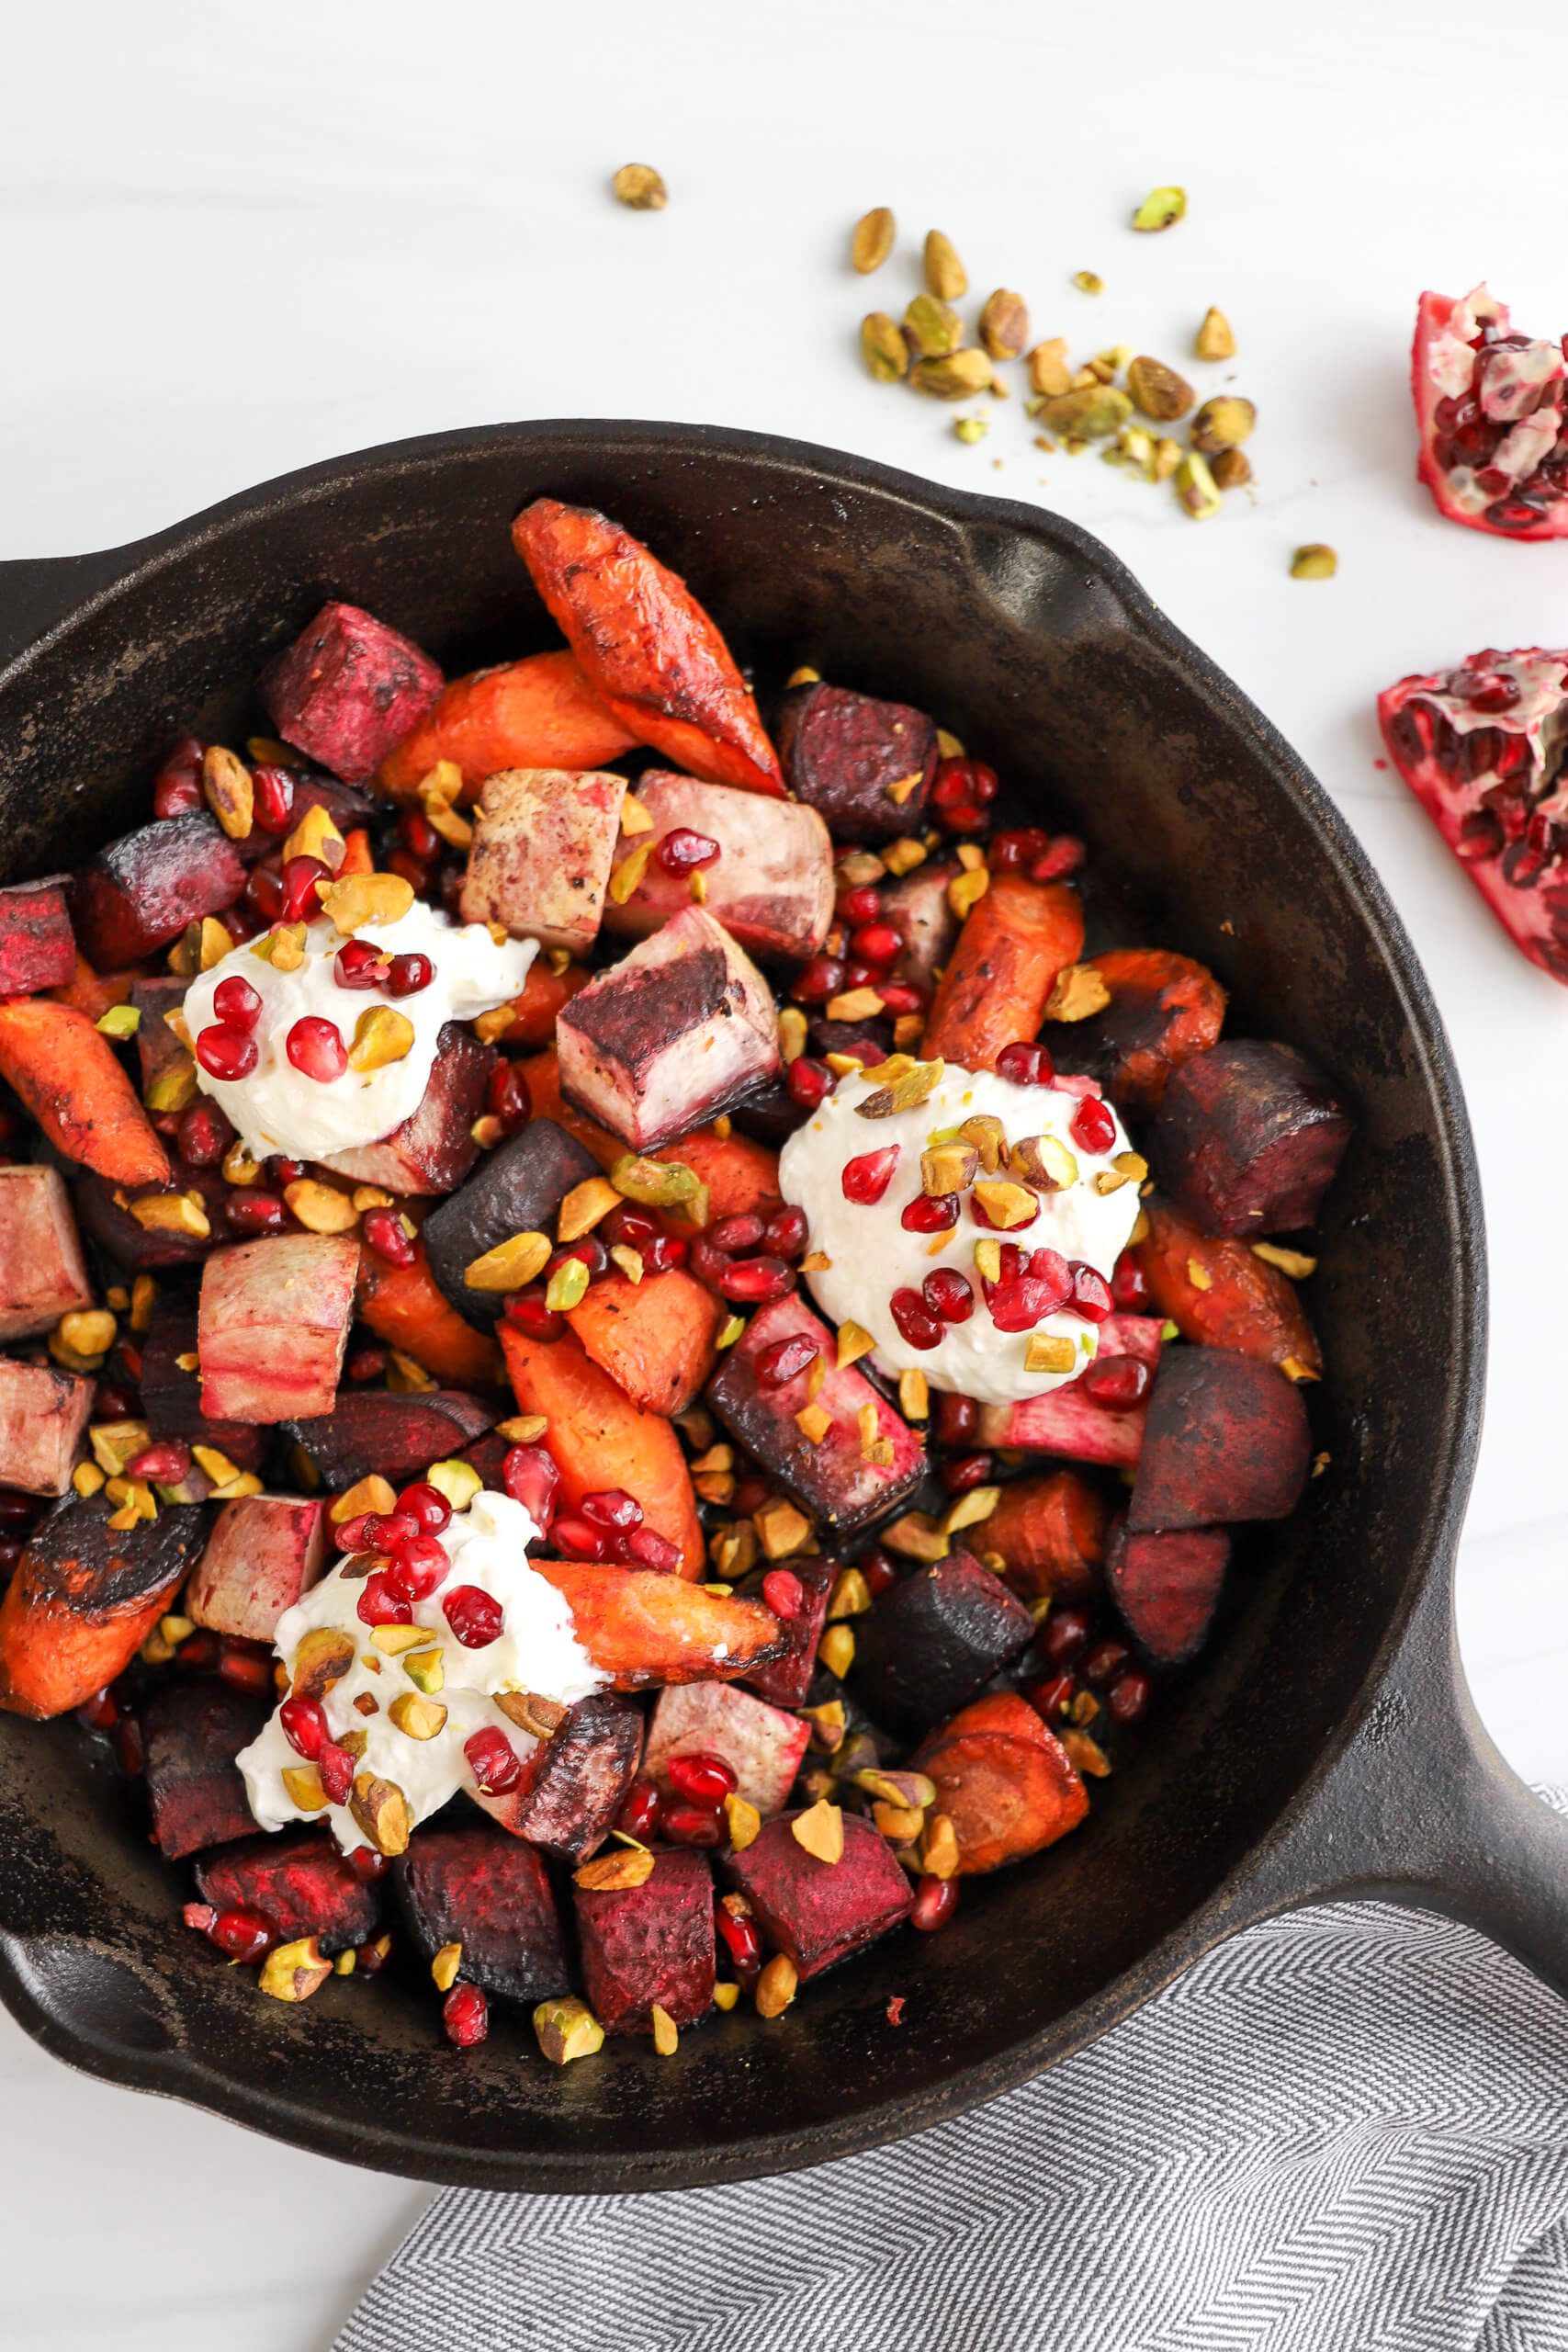 Pomegranate-Glazed Roasted Root Vegetables with Whipped Goat Cheese